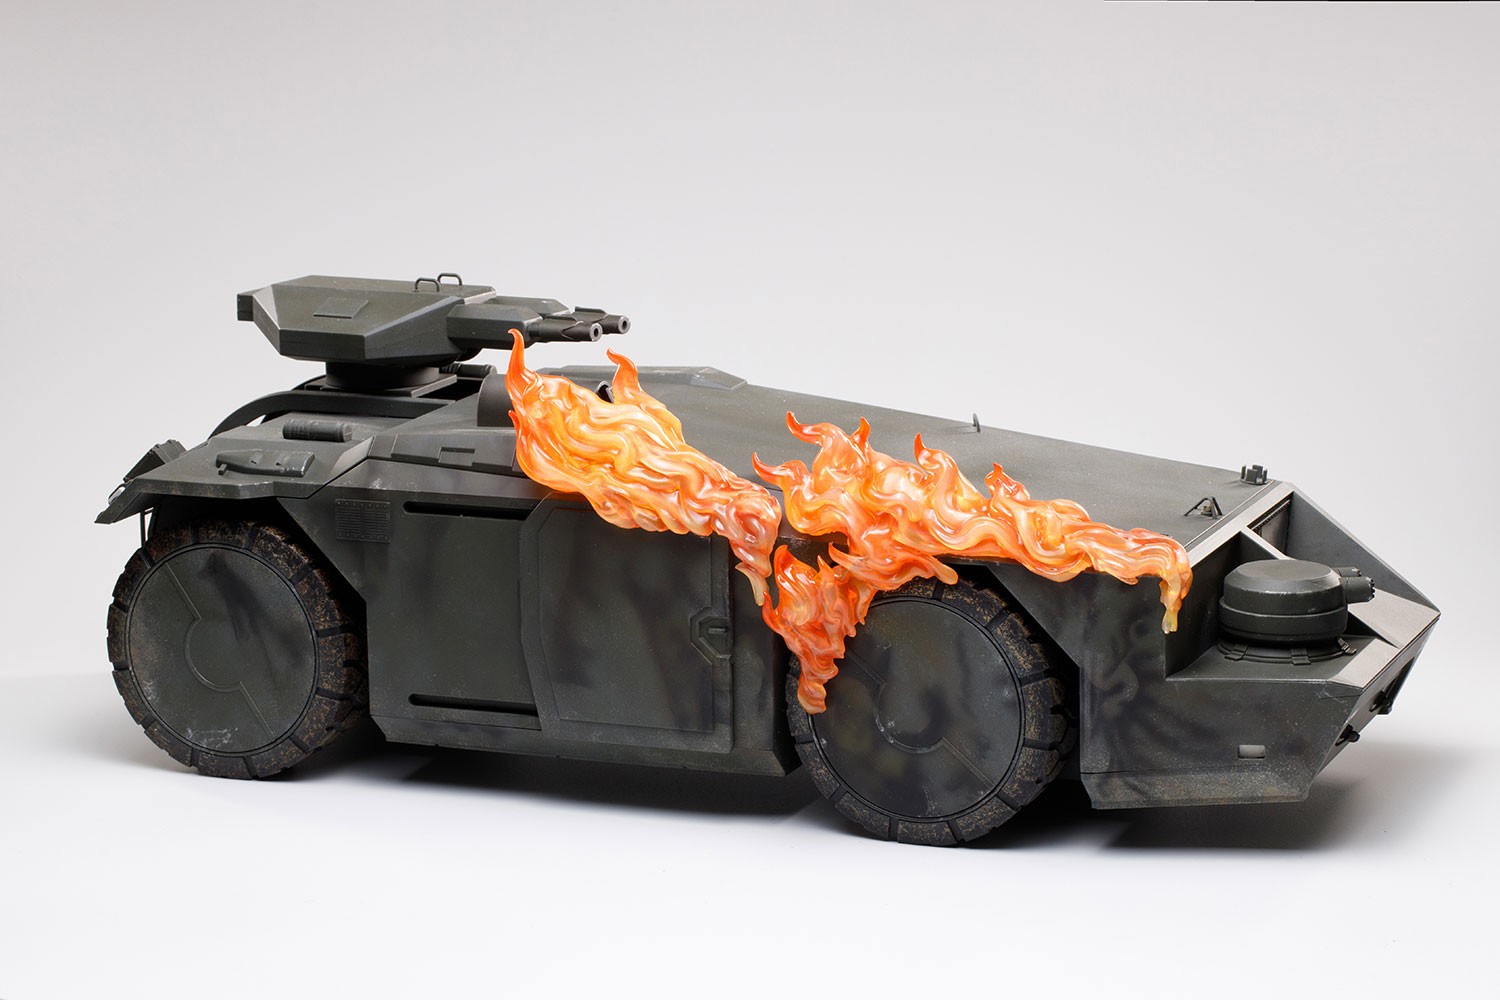 Burning Armored Personnel Carrier (Prototype Shown) View 1